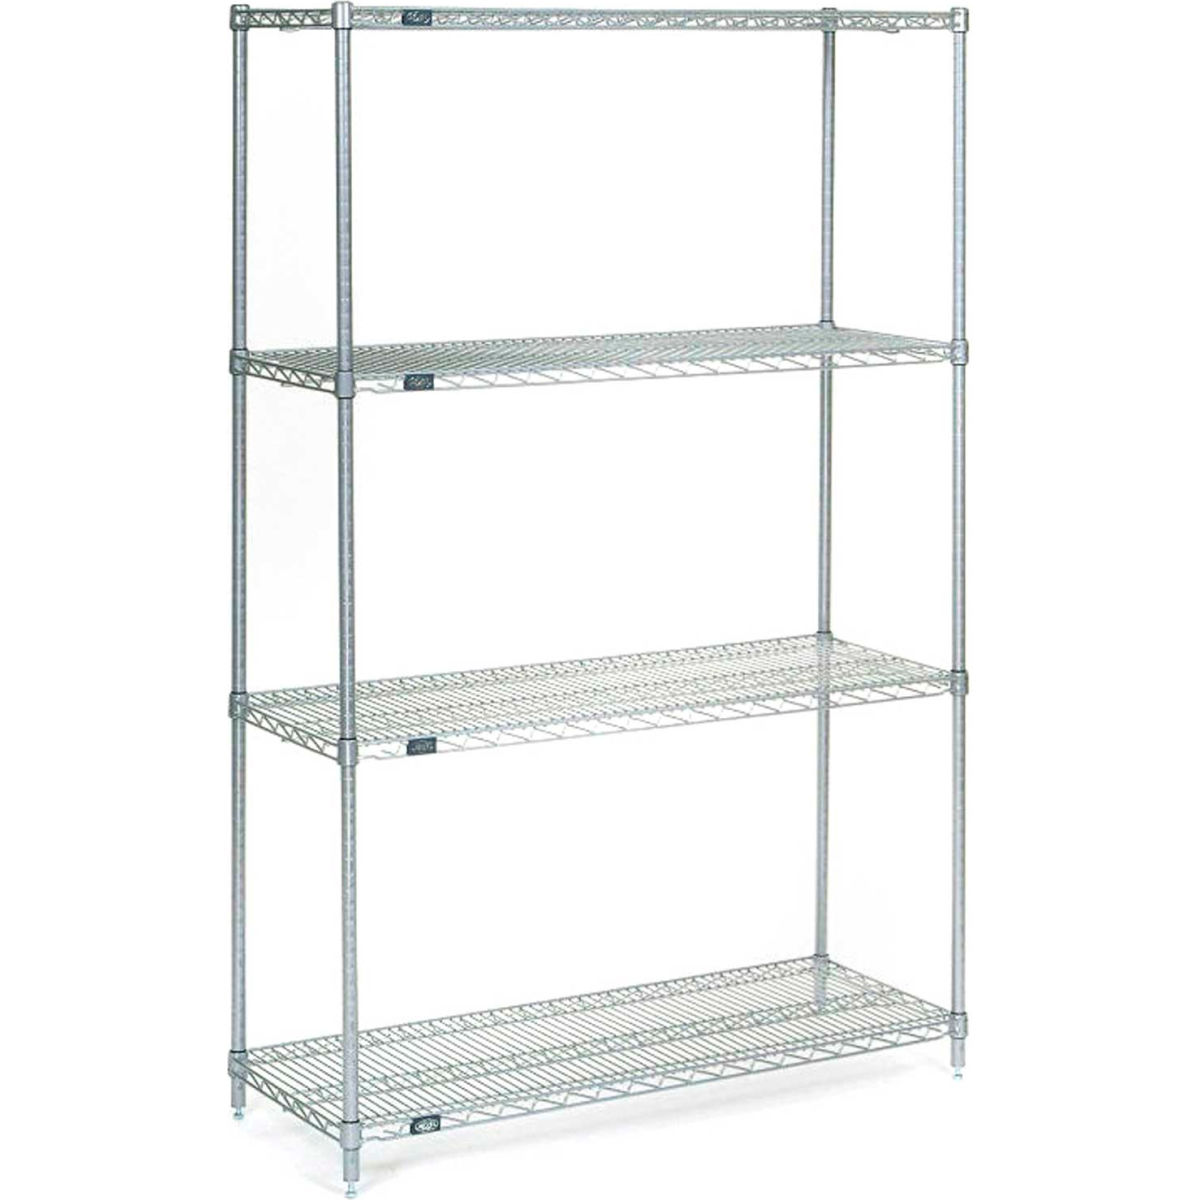 Picture of Global Industrial 14428S 86 x 42 x 14 in. Nexel Stainless Steel Starter Wire Shelving